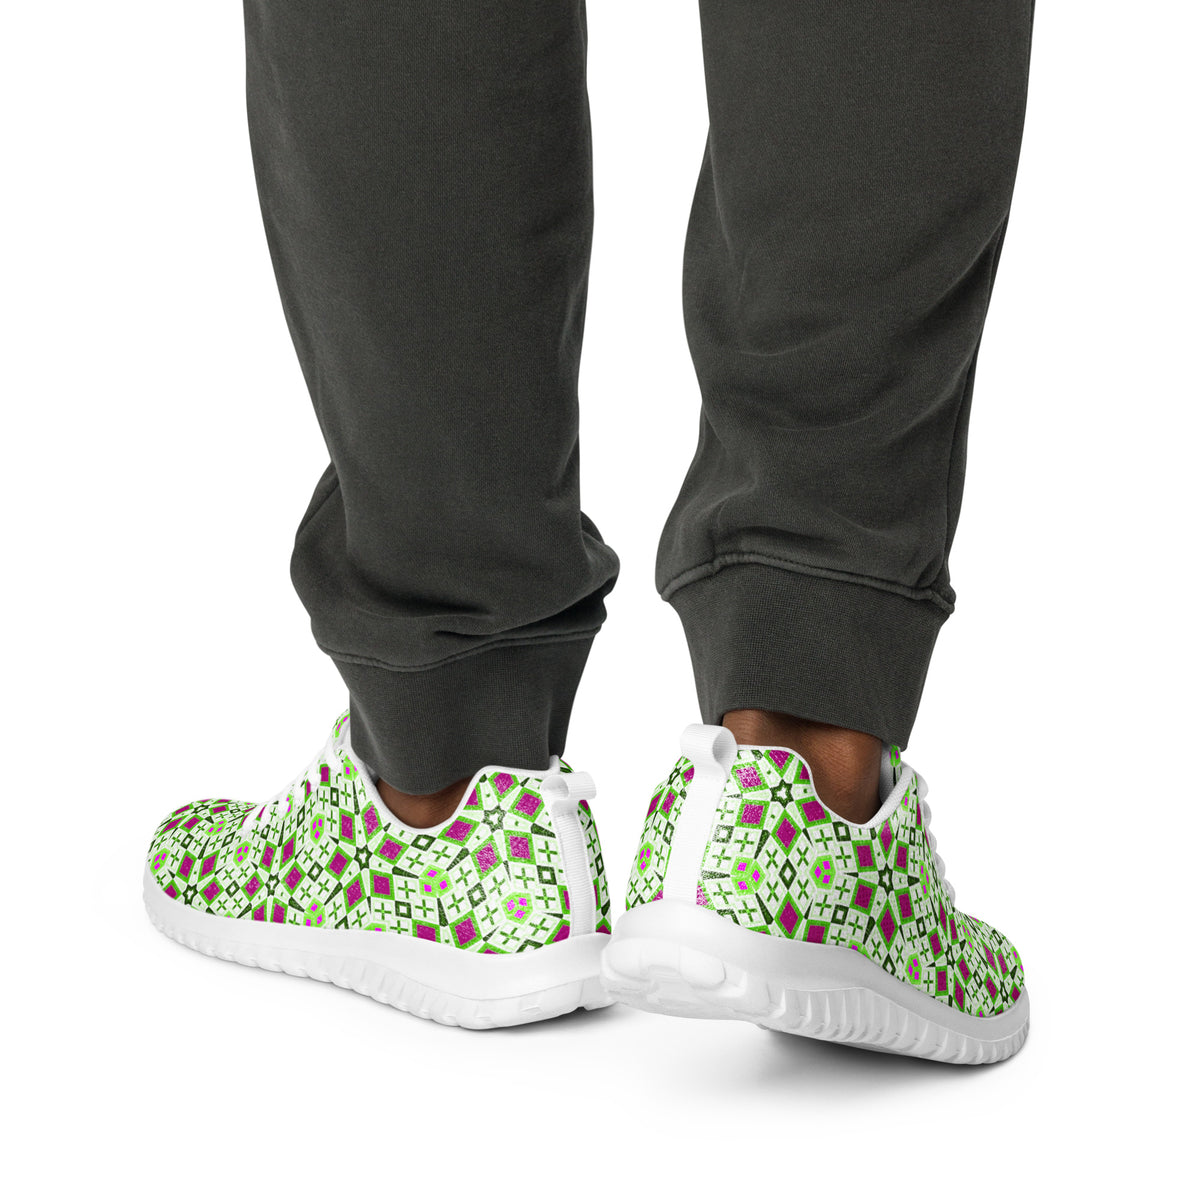 Chromatic Kaleidoscope Sneakers for Him